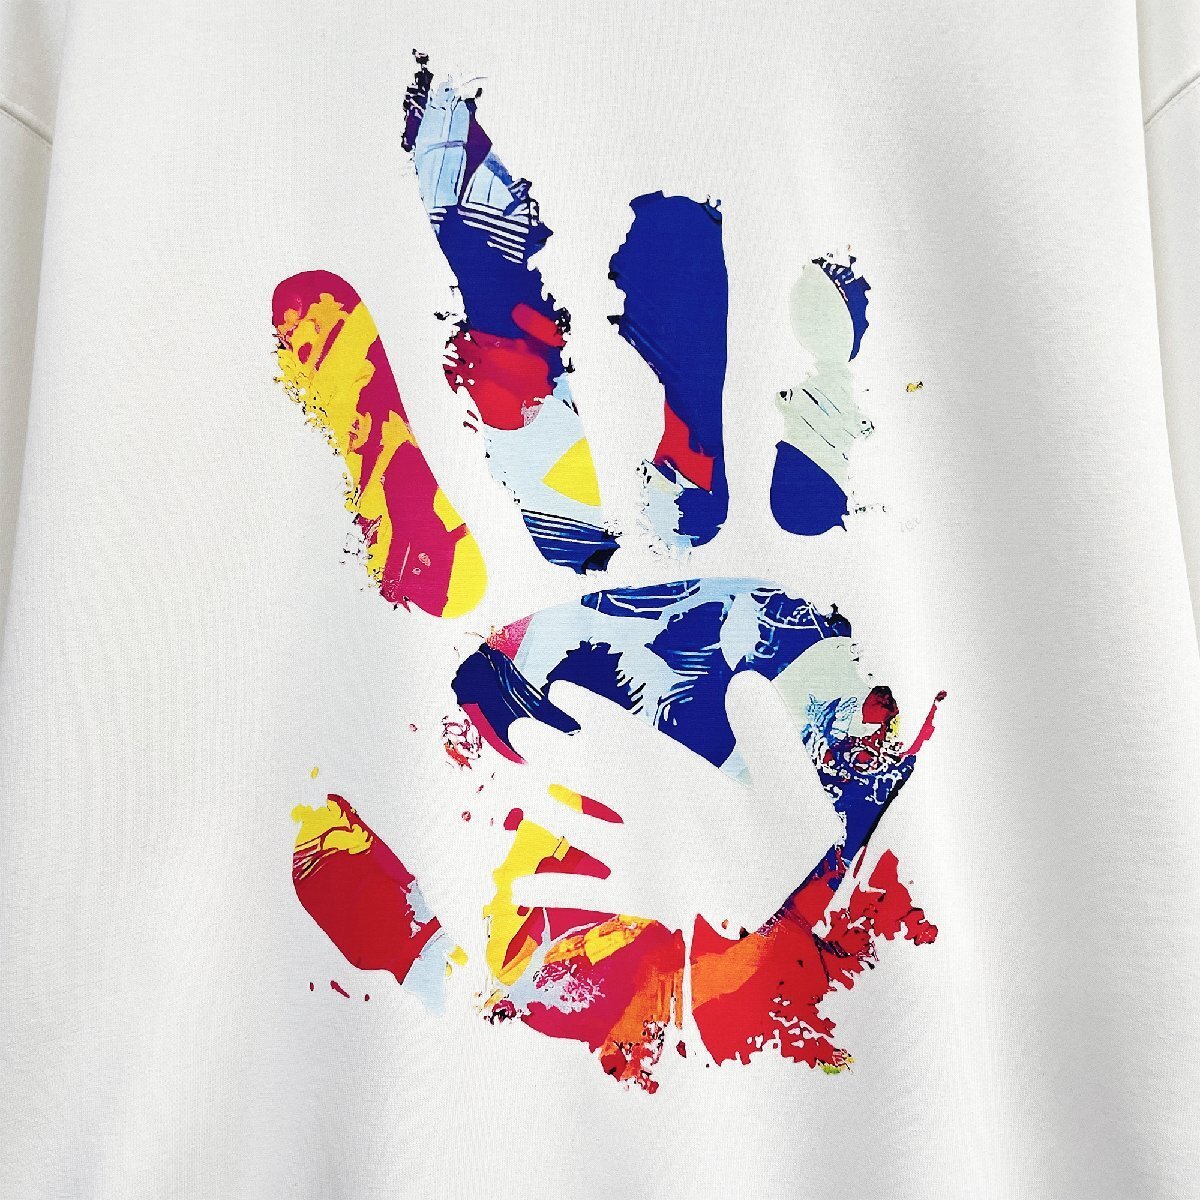  high grade regular price 4 ten thousand FRANKLIN MUSK* America * New York departure sweatshirt fine quality soft colorful . hand cut and sewn Street size 2